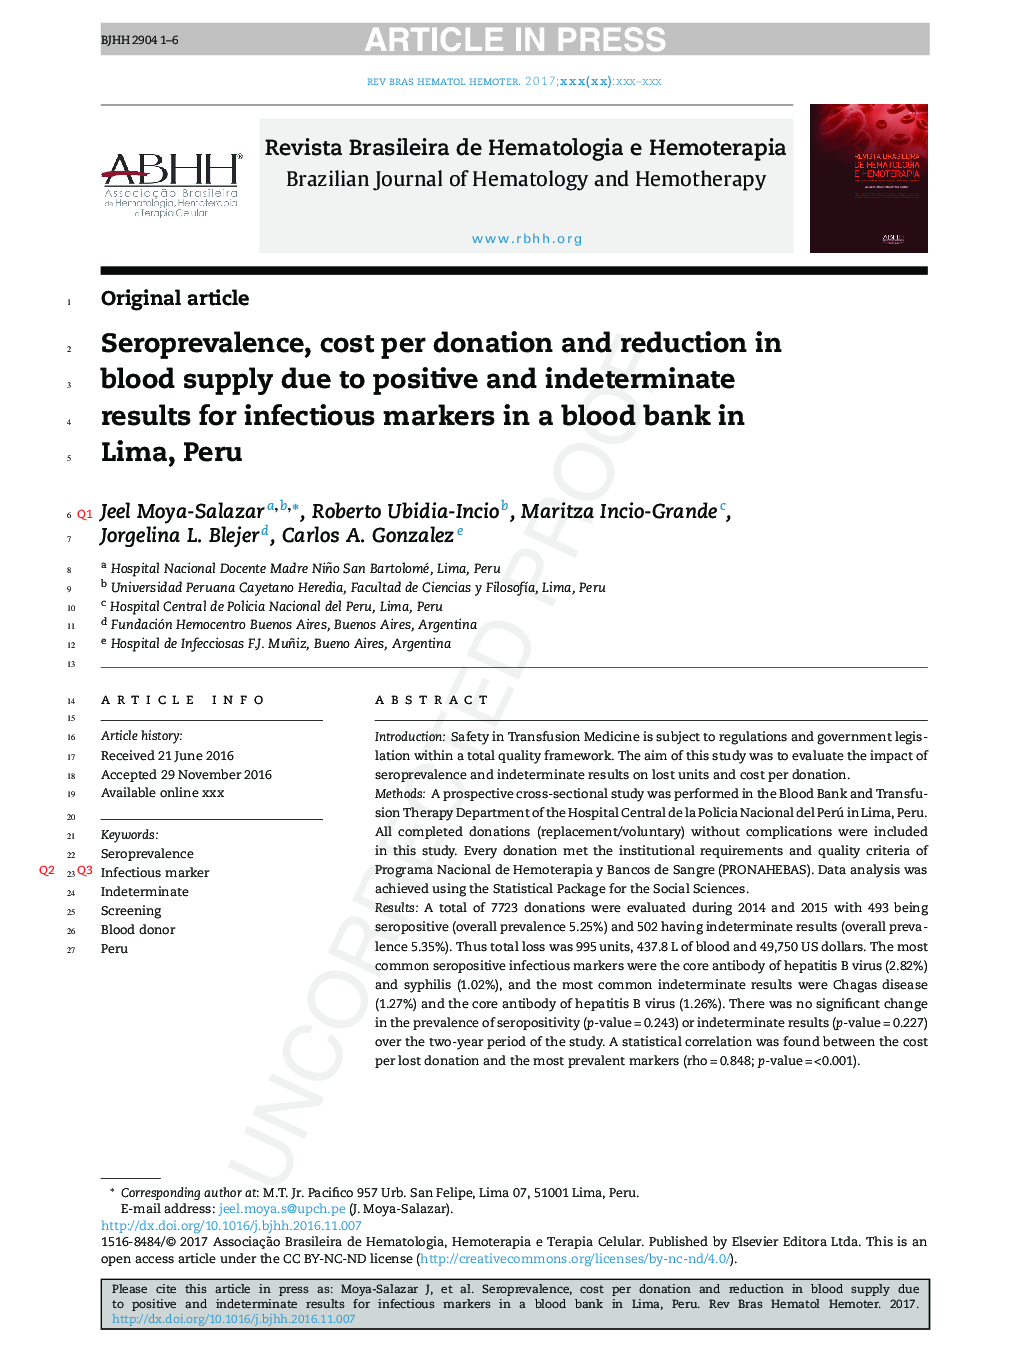 Seroprevalence, cost per donation and reduction in blood supply due to positive and indeterminate results for infectious markers in a blood bank in Lima, Peru